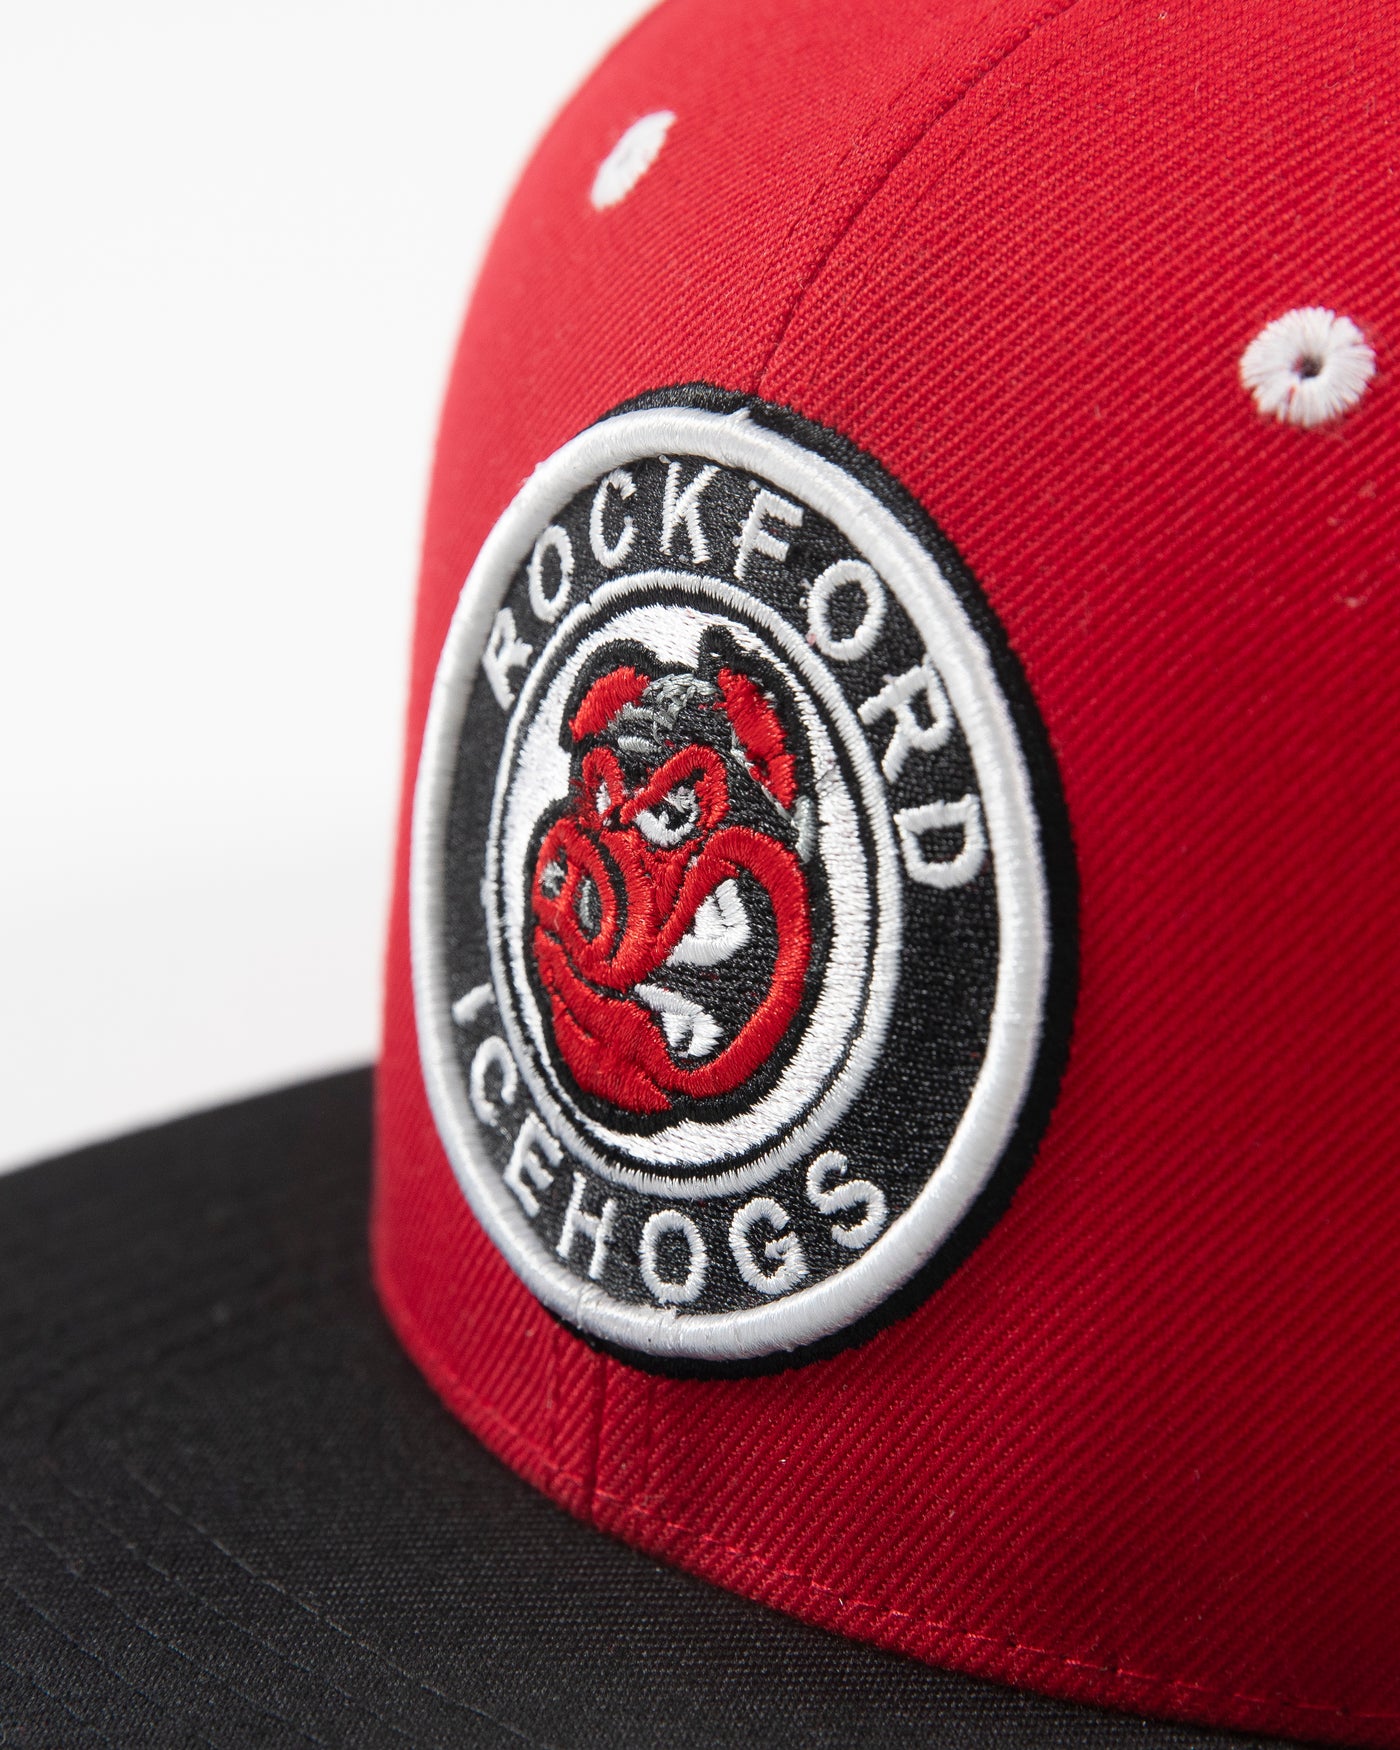 Black and red flat brim adjustable cap with Rockford IceHogs classic logo embroidered on front - detail lay flat